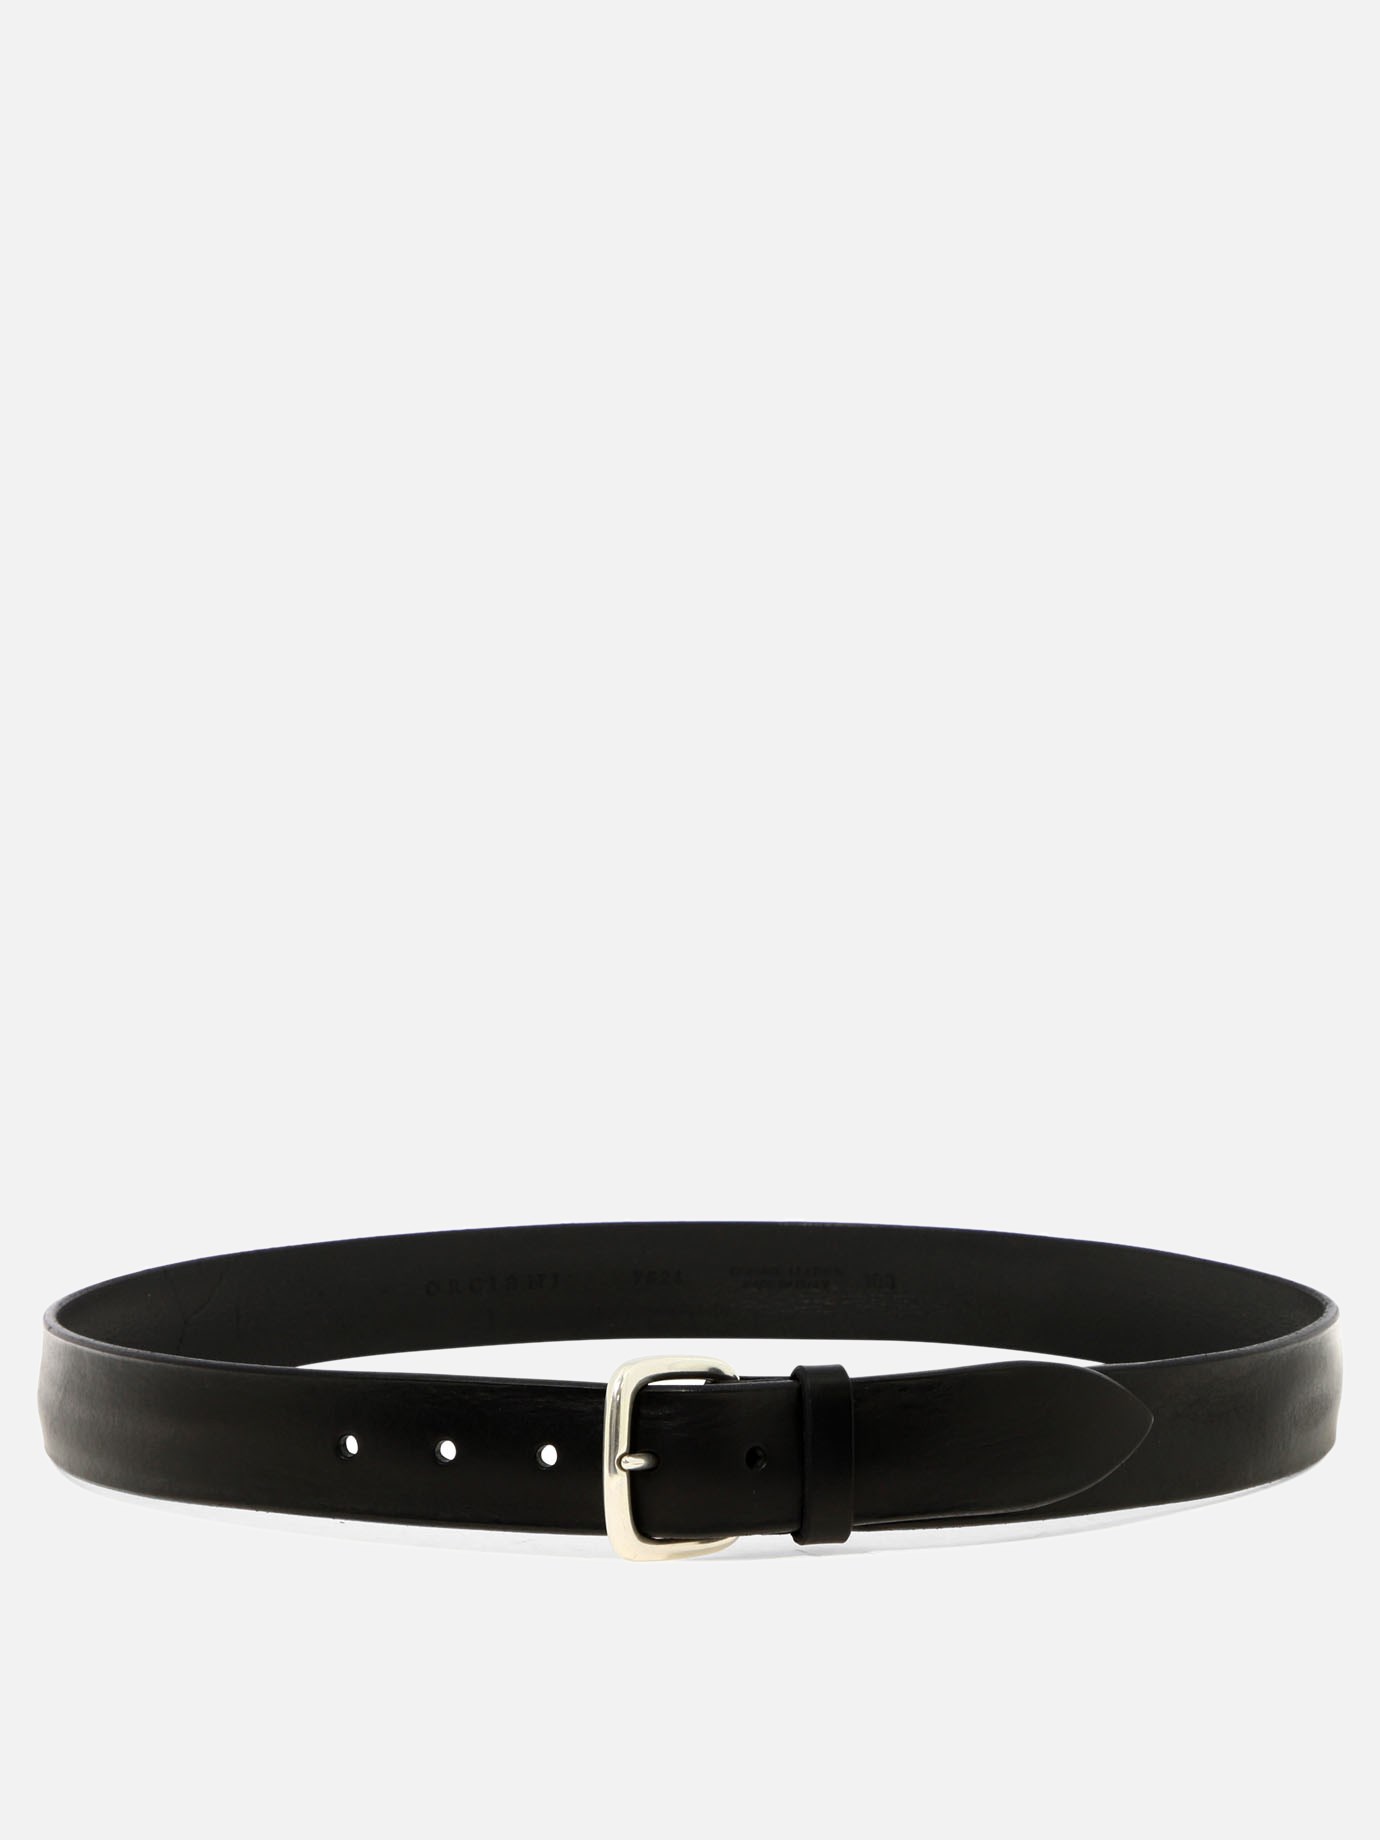 Bull Soft  beltby Orciani - 2